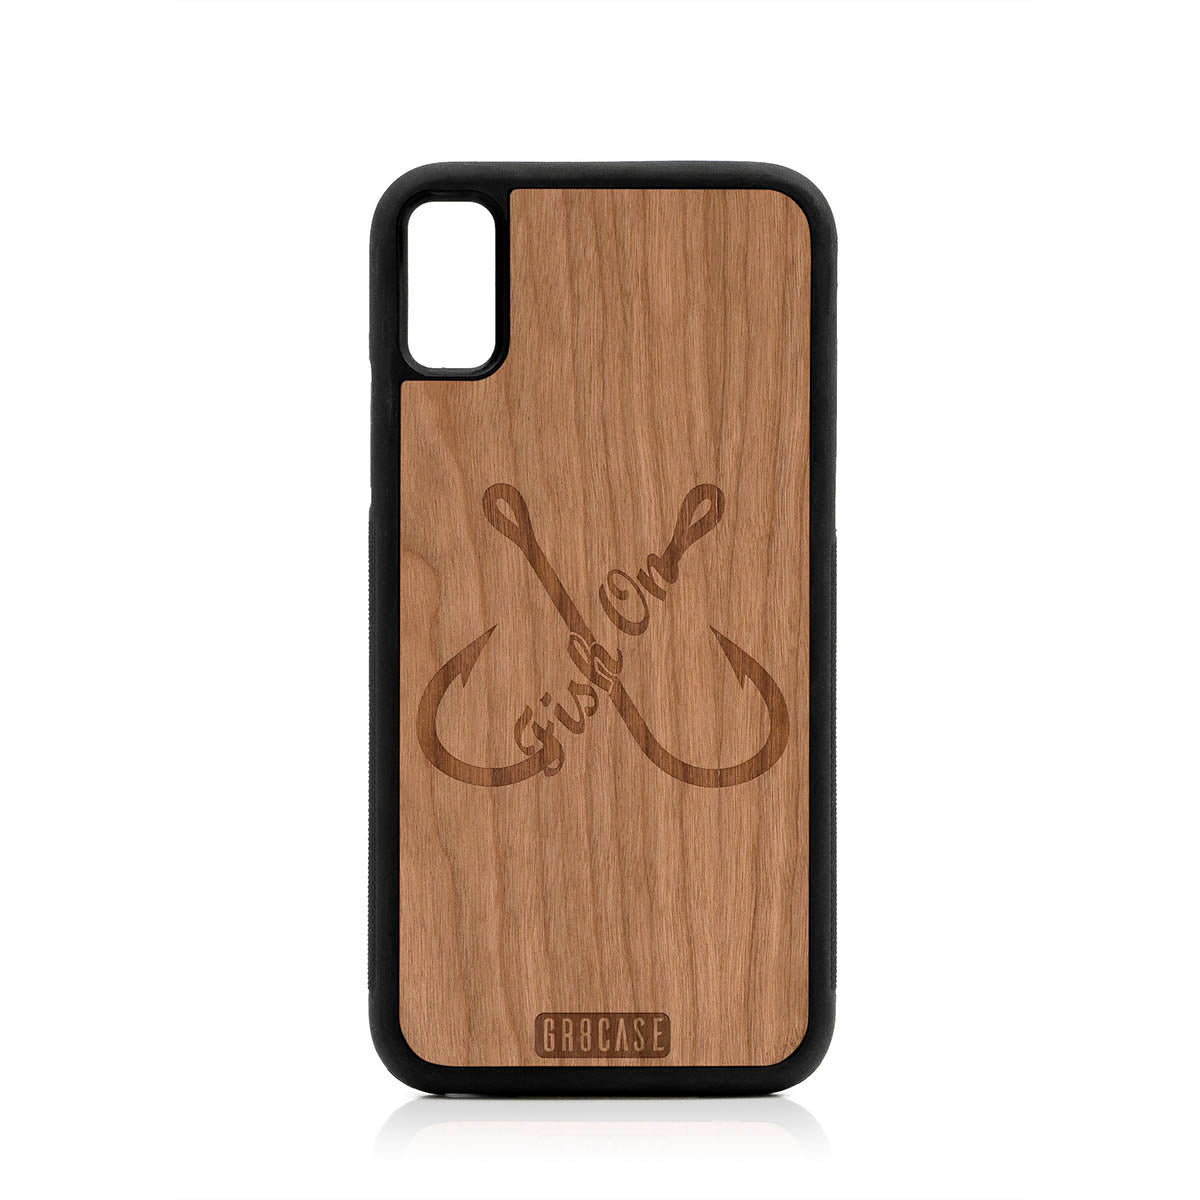 Fish On (Fish Hooks) Design Wood Case For iPhone XS Max by GR8CASE